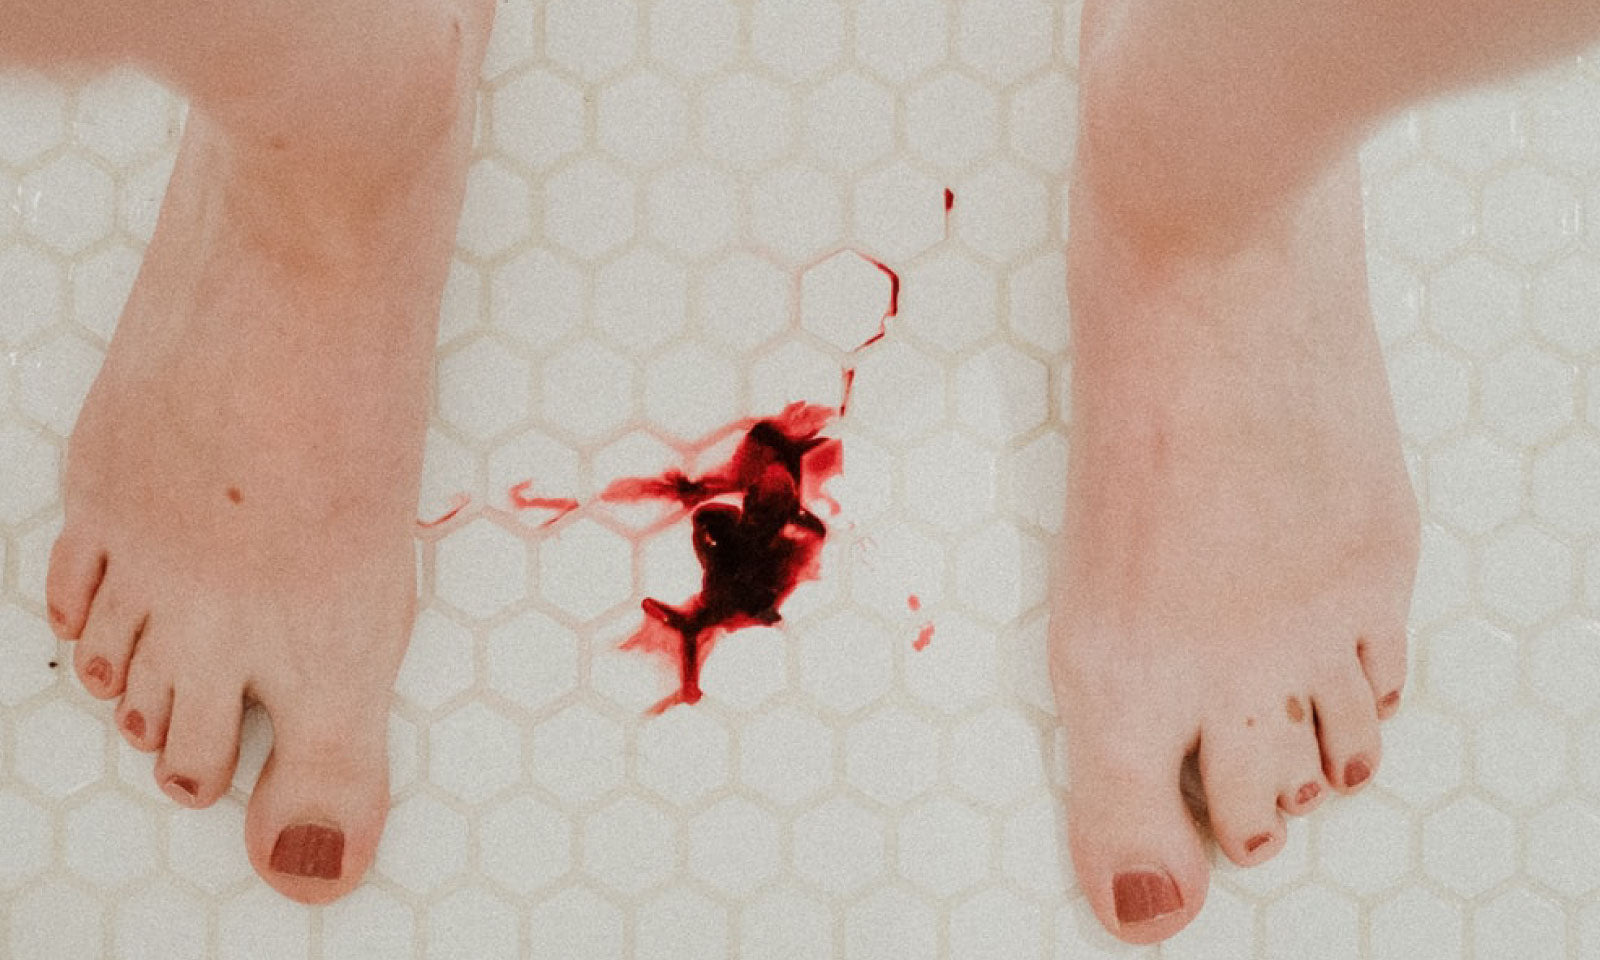 Why is My Period So Heavy? Causes and What You Can Do